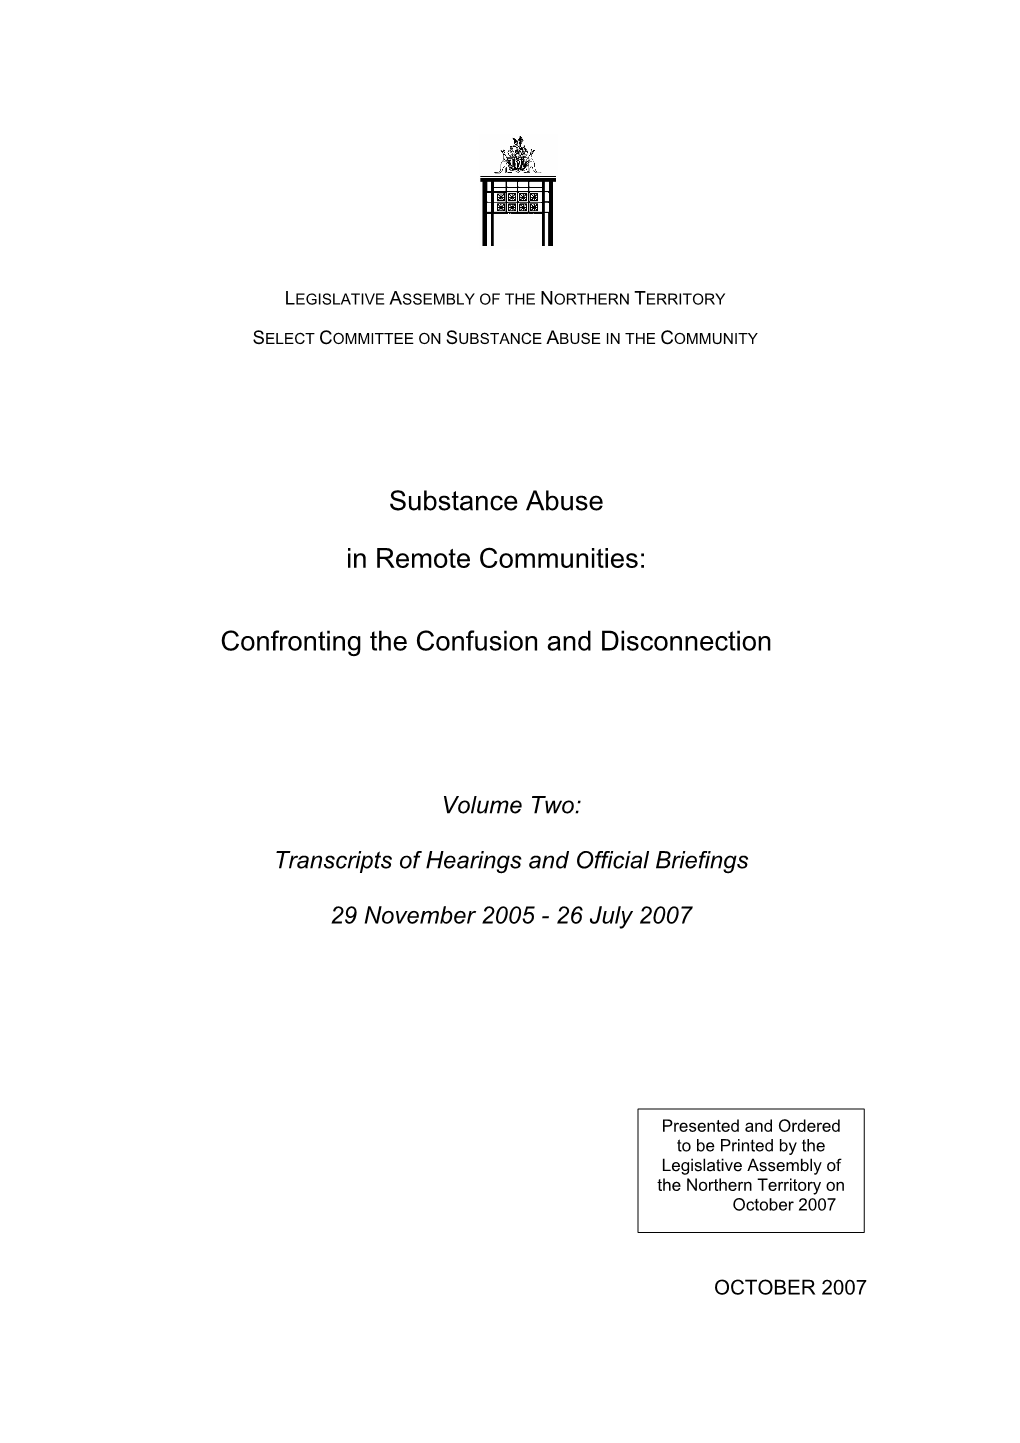 Substance Abuse in Remote Communities: Confronting the Confusion and Disconnection